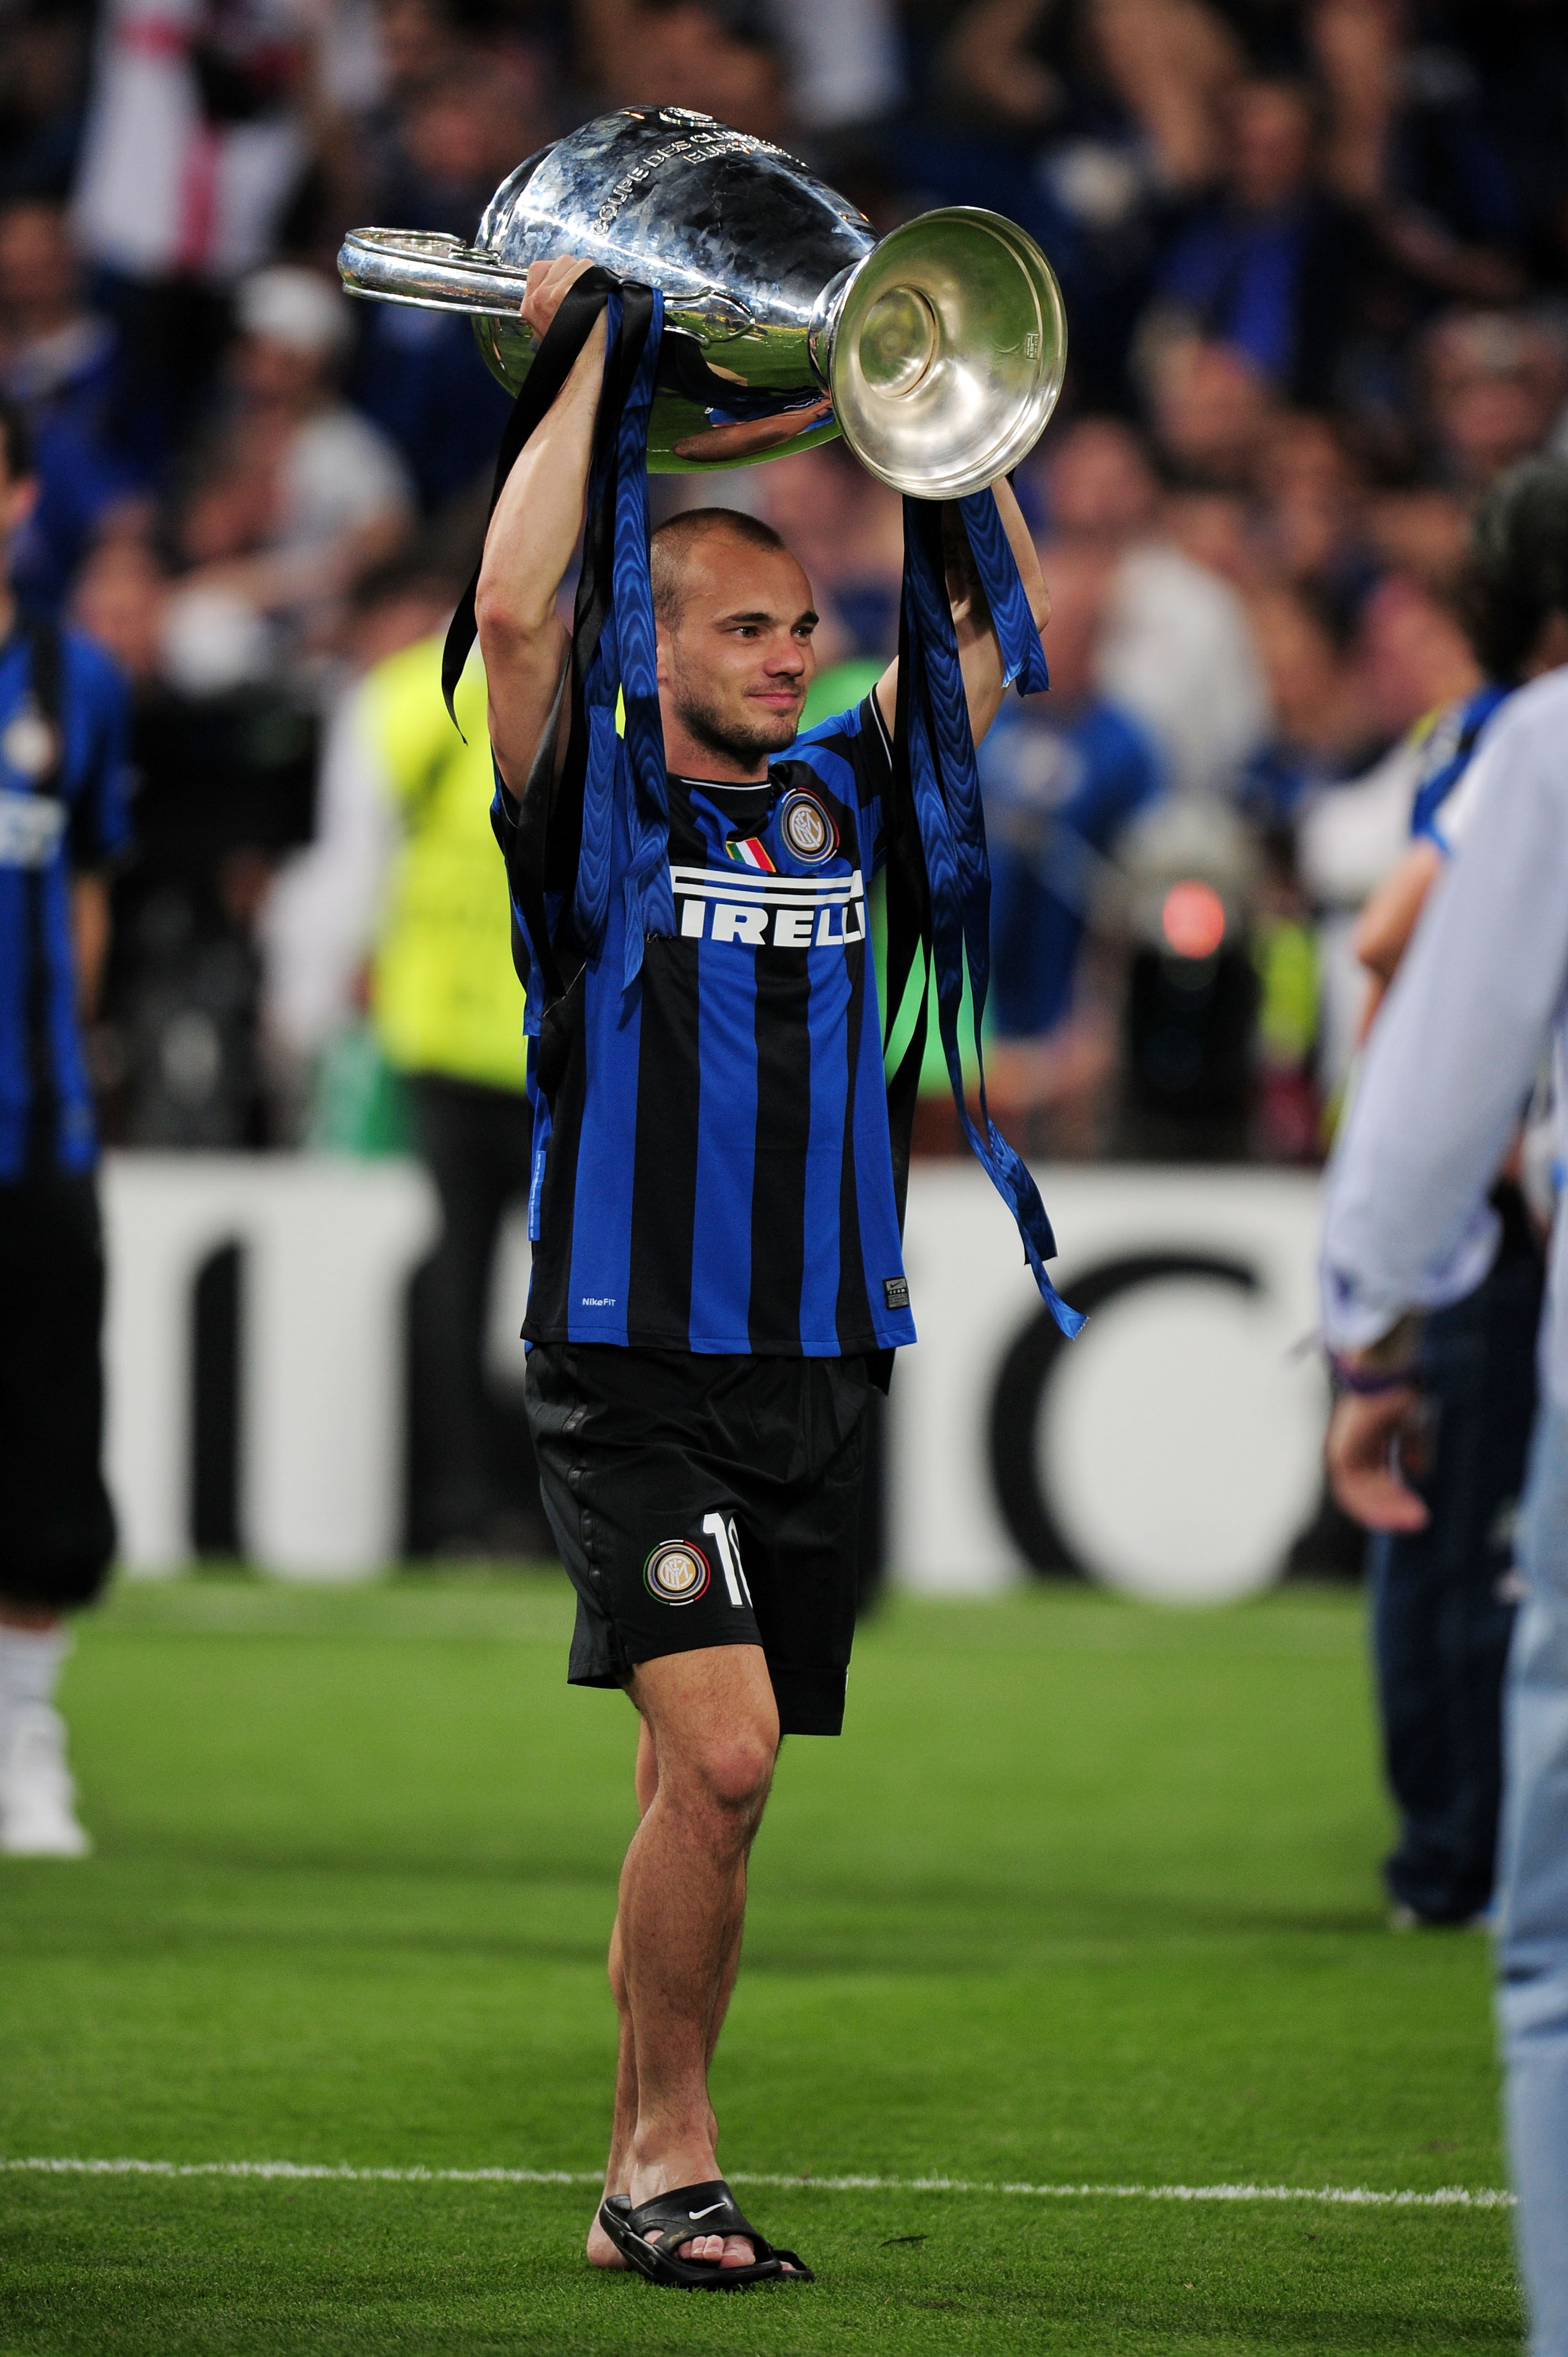 MADRID, SPAIN - MAY 22:  Wesley Sneijder of Inter Milan celebrates victory after the UEFA Champions League Final match between FC Bayern Muenchen and Inter Milan at the Estadio Santiago Bernabeu on May 22, 2010 in Madrid, Spain.  (Photo by Shaun Botterill